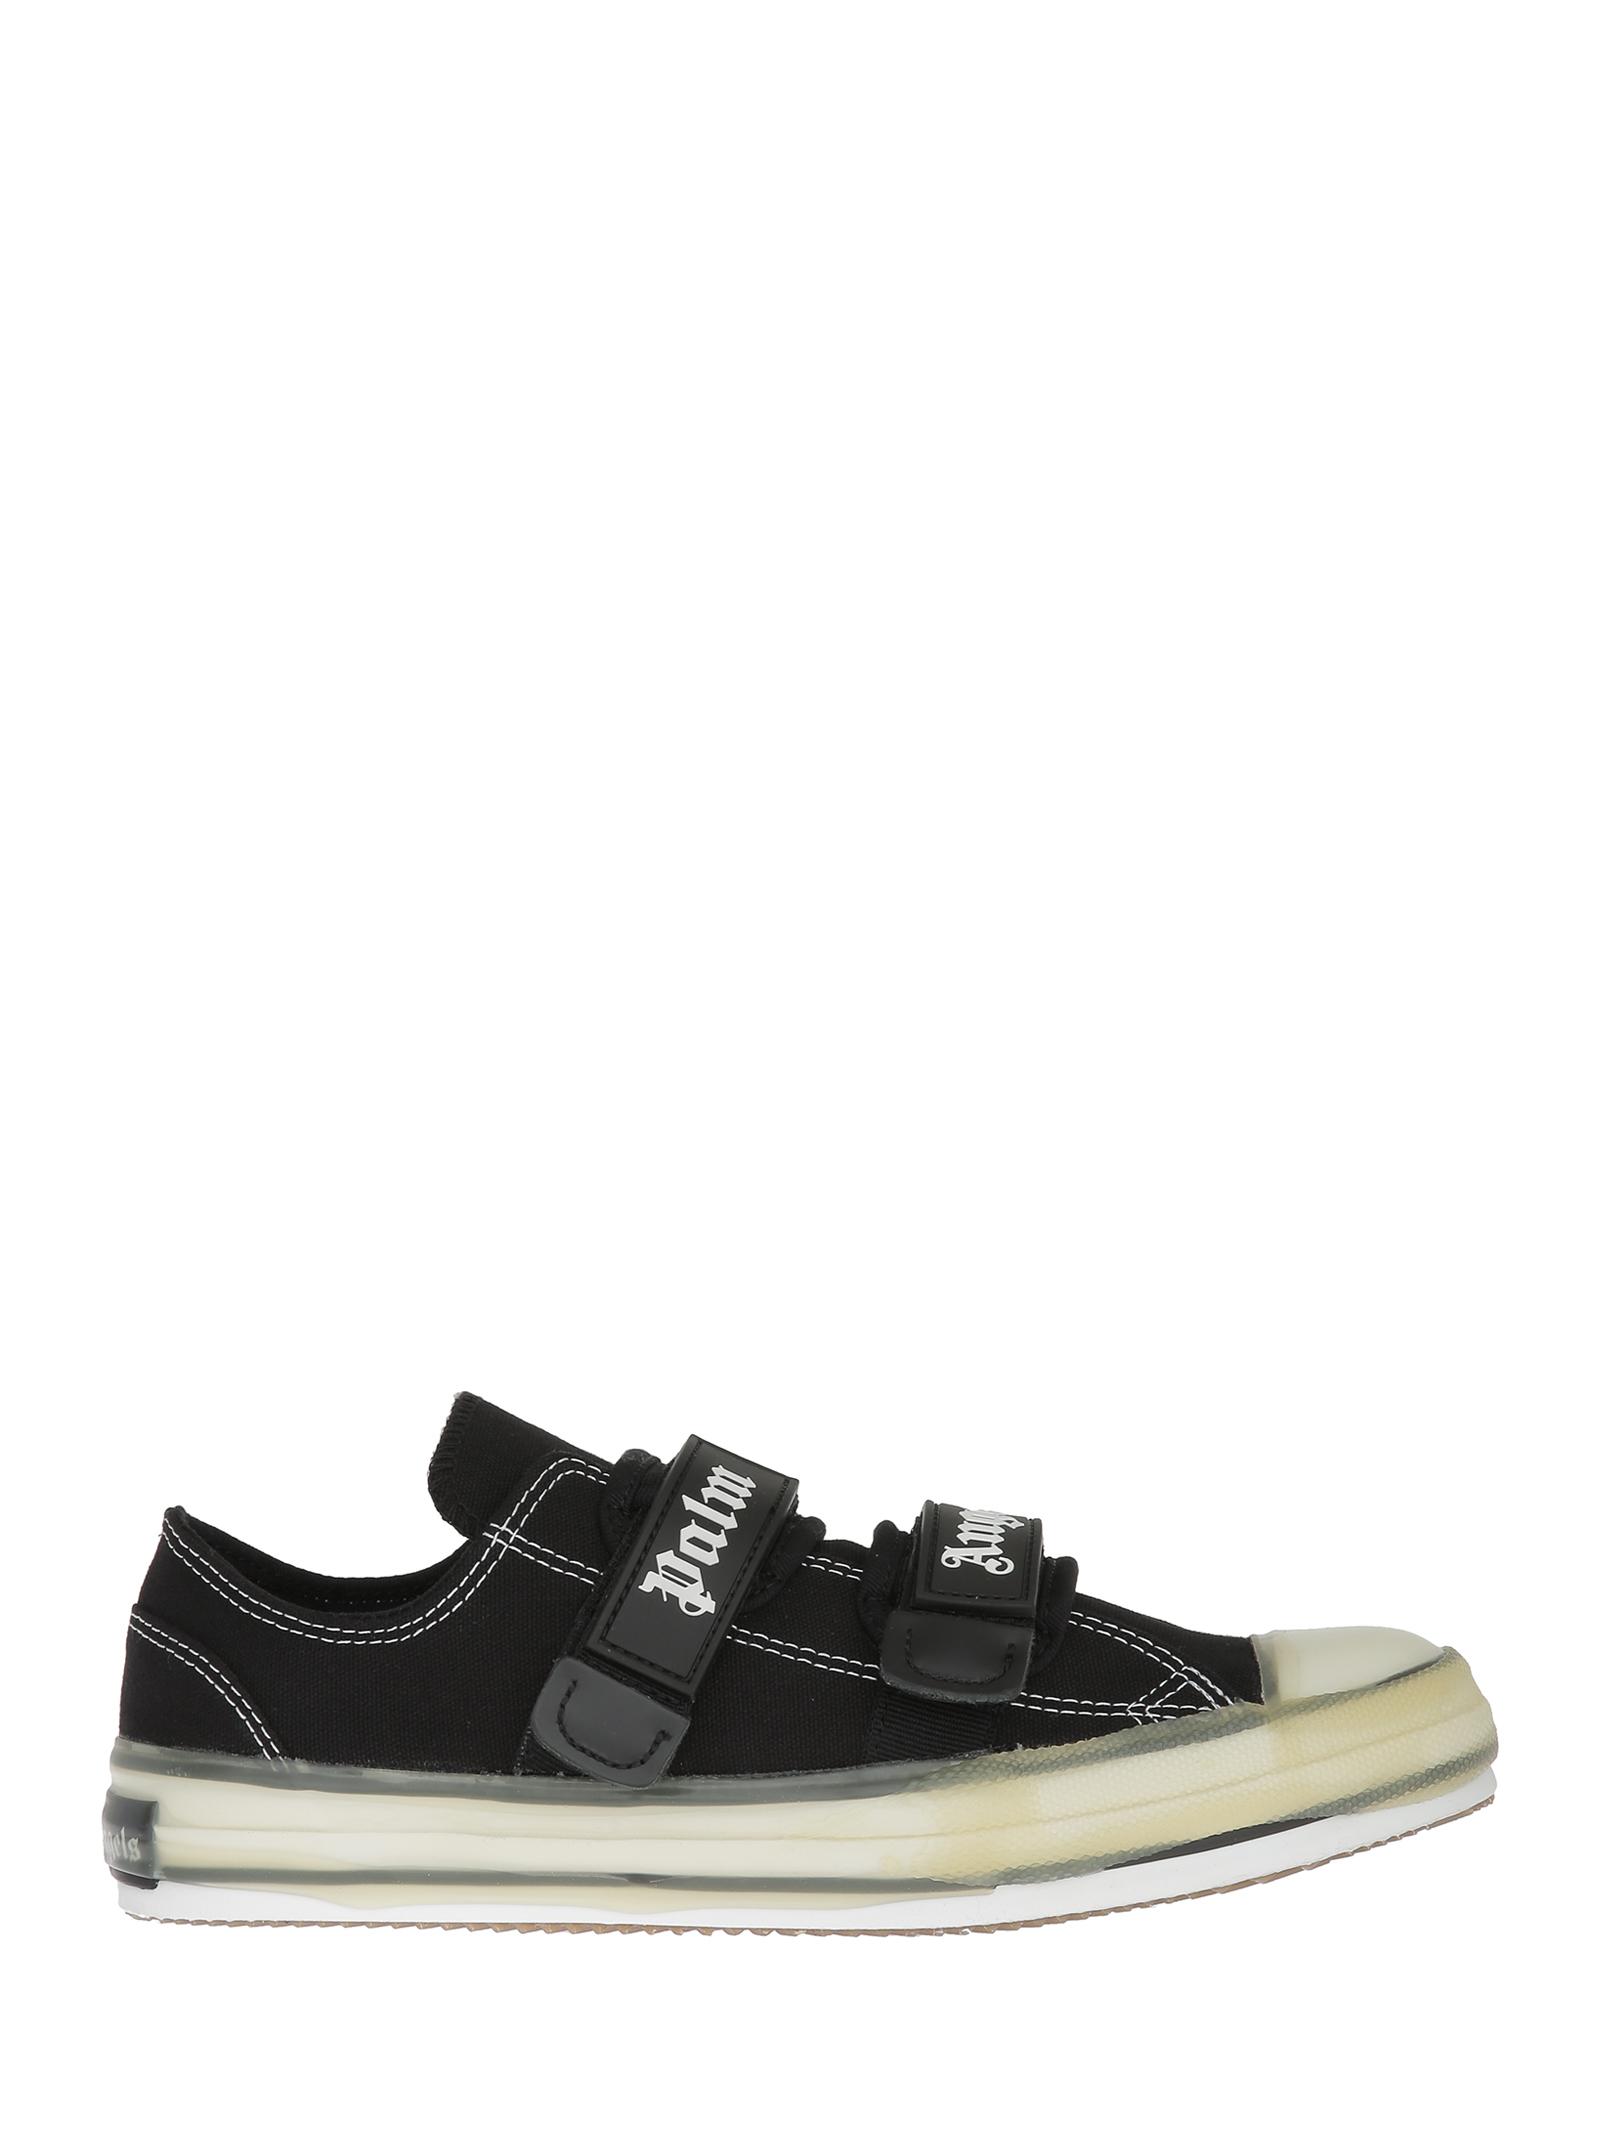 Palm Angels Black Vulcanized Sneakers In Canvas With Two Velcro Straps ...